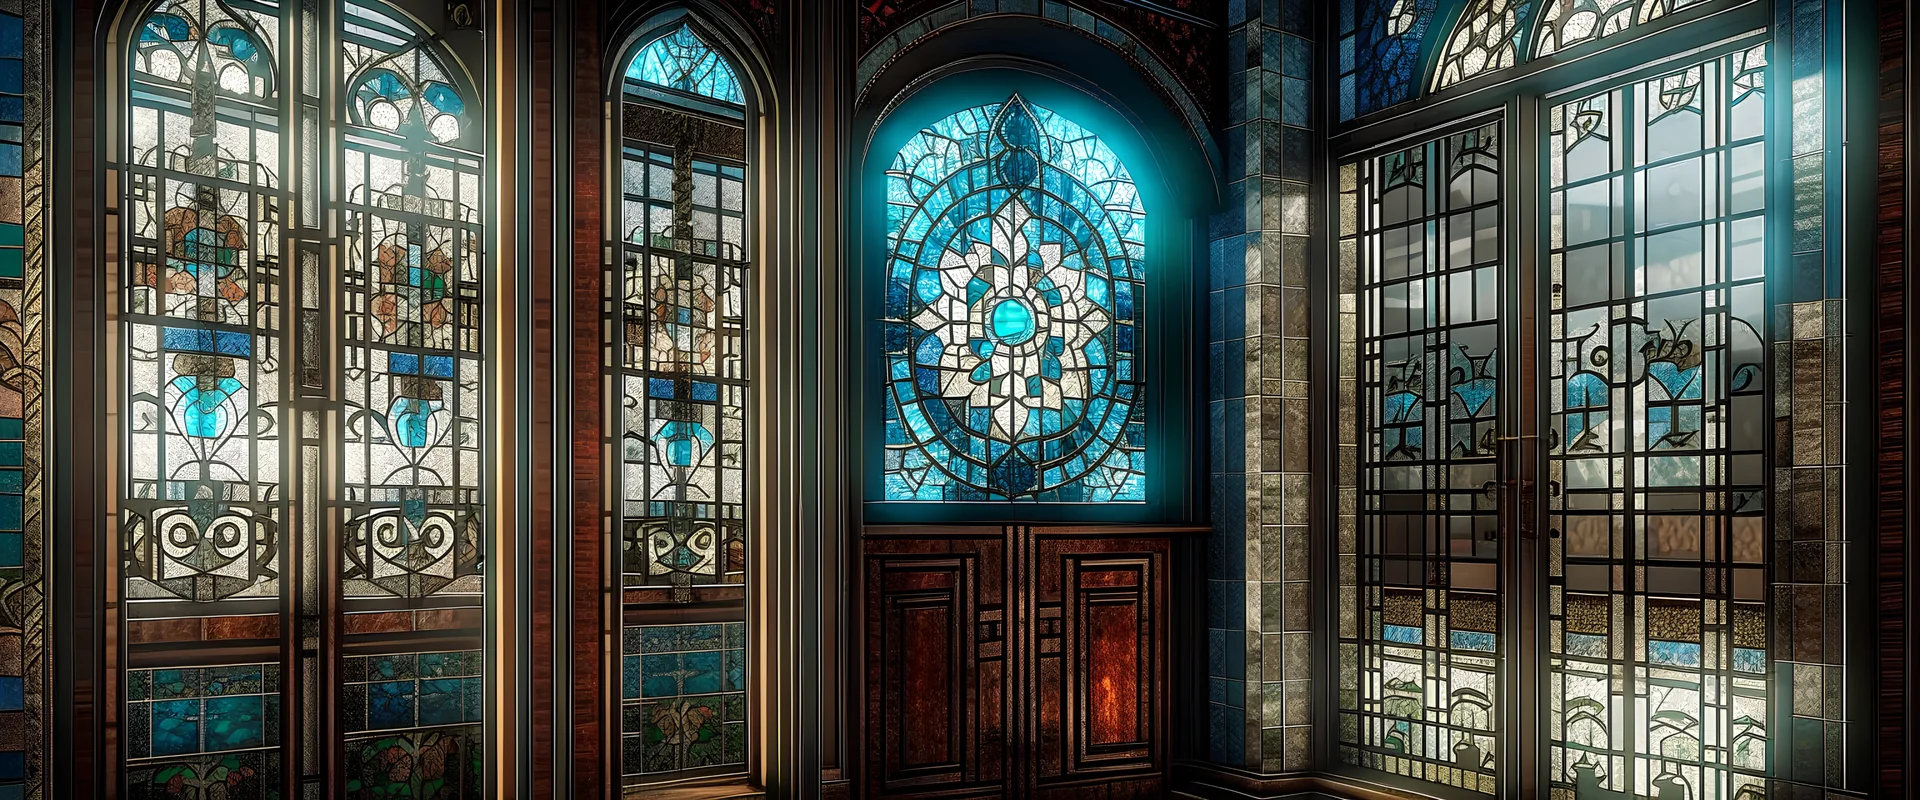 epic, 4k, detailed render, traditional, heritage, chrome, iranian, door, stain glass